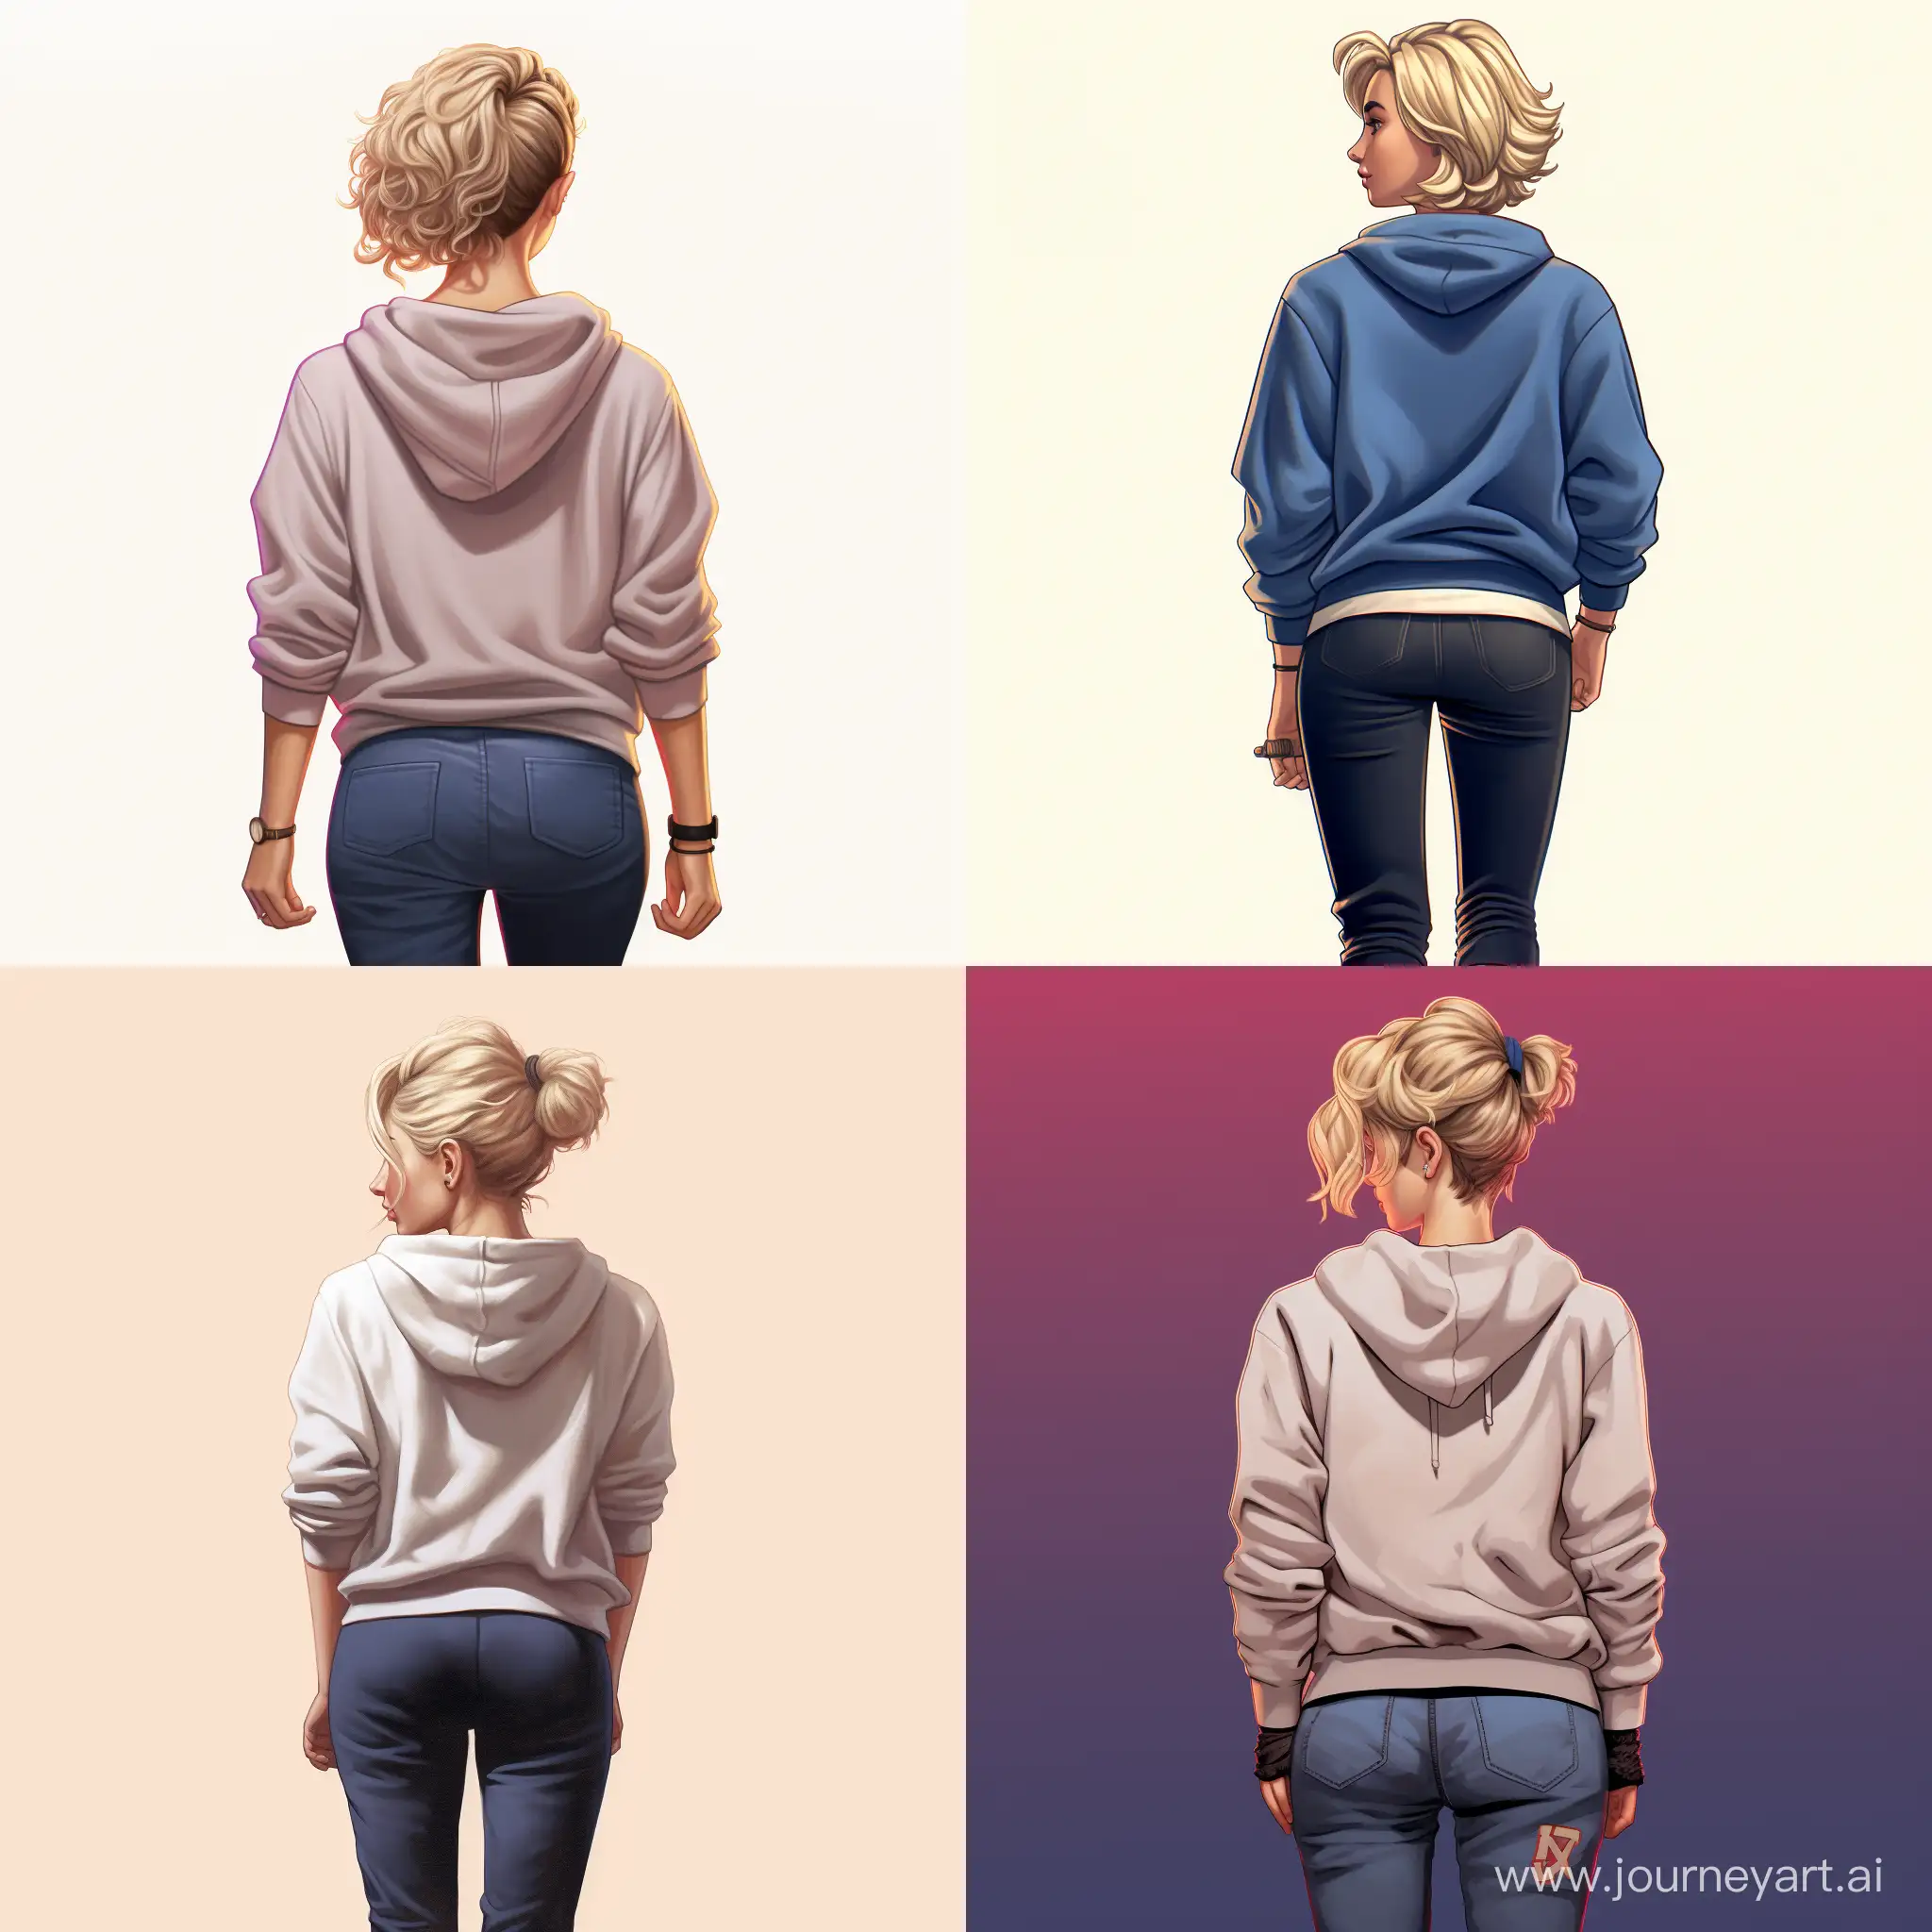 Create images A woman with a fuller figure and short blond hair, seen from the back. She’s wearing jeans, a sweatshirt, and sneakers, disney style